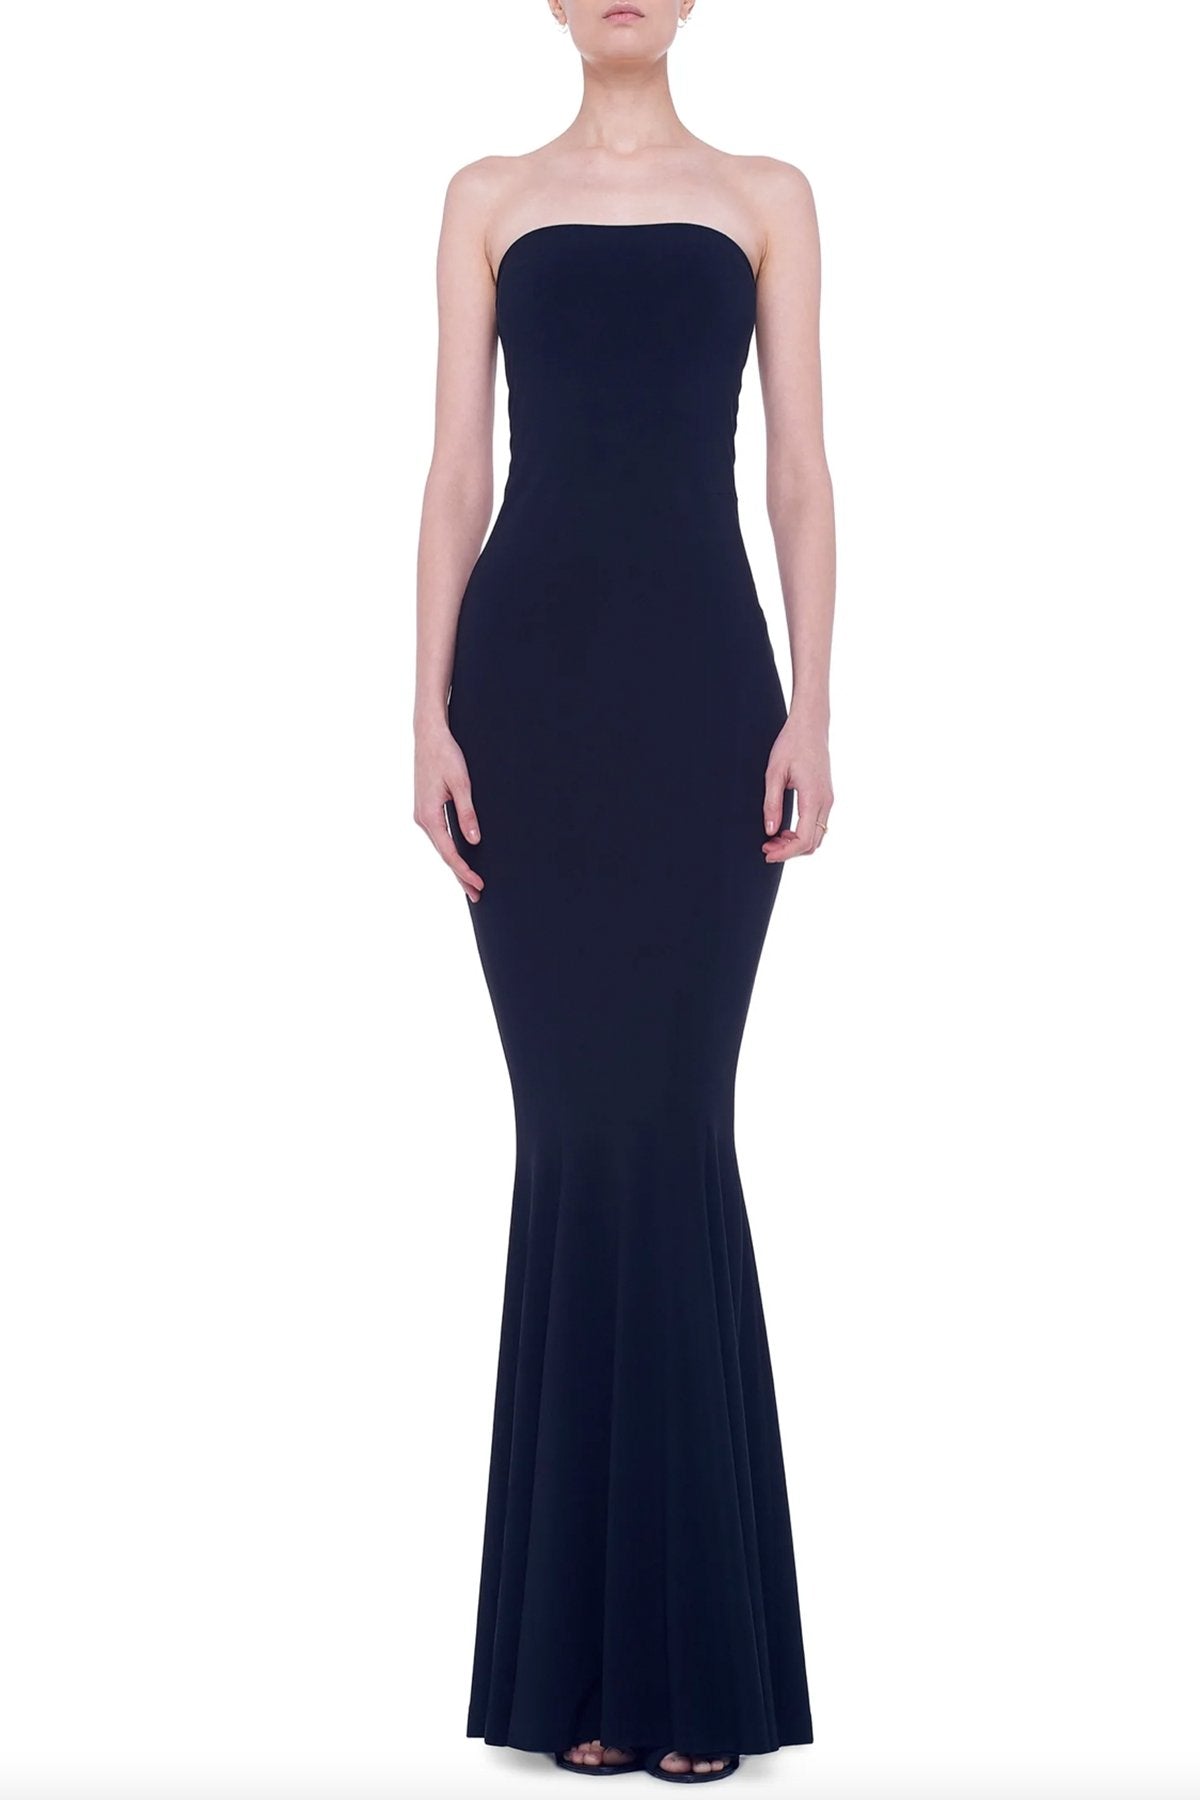 Strapless Fishtail Gown in Black - shop-olivia.com